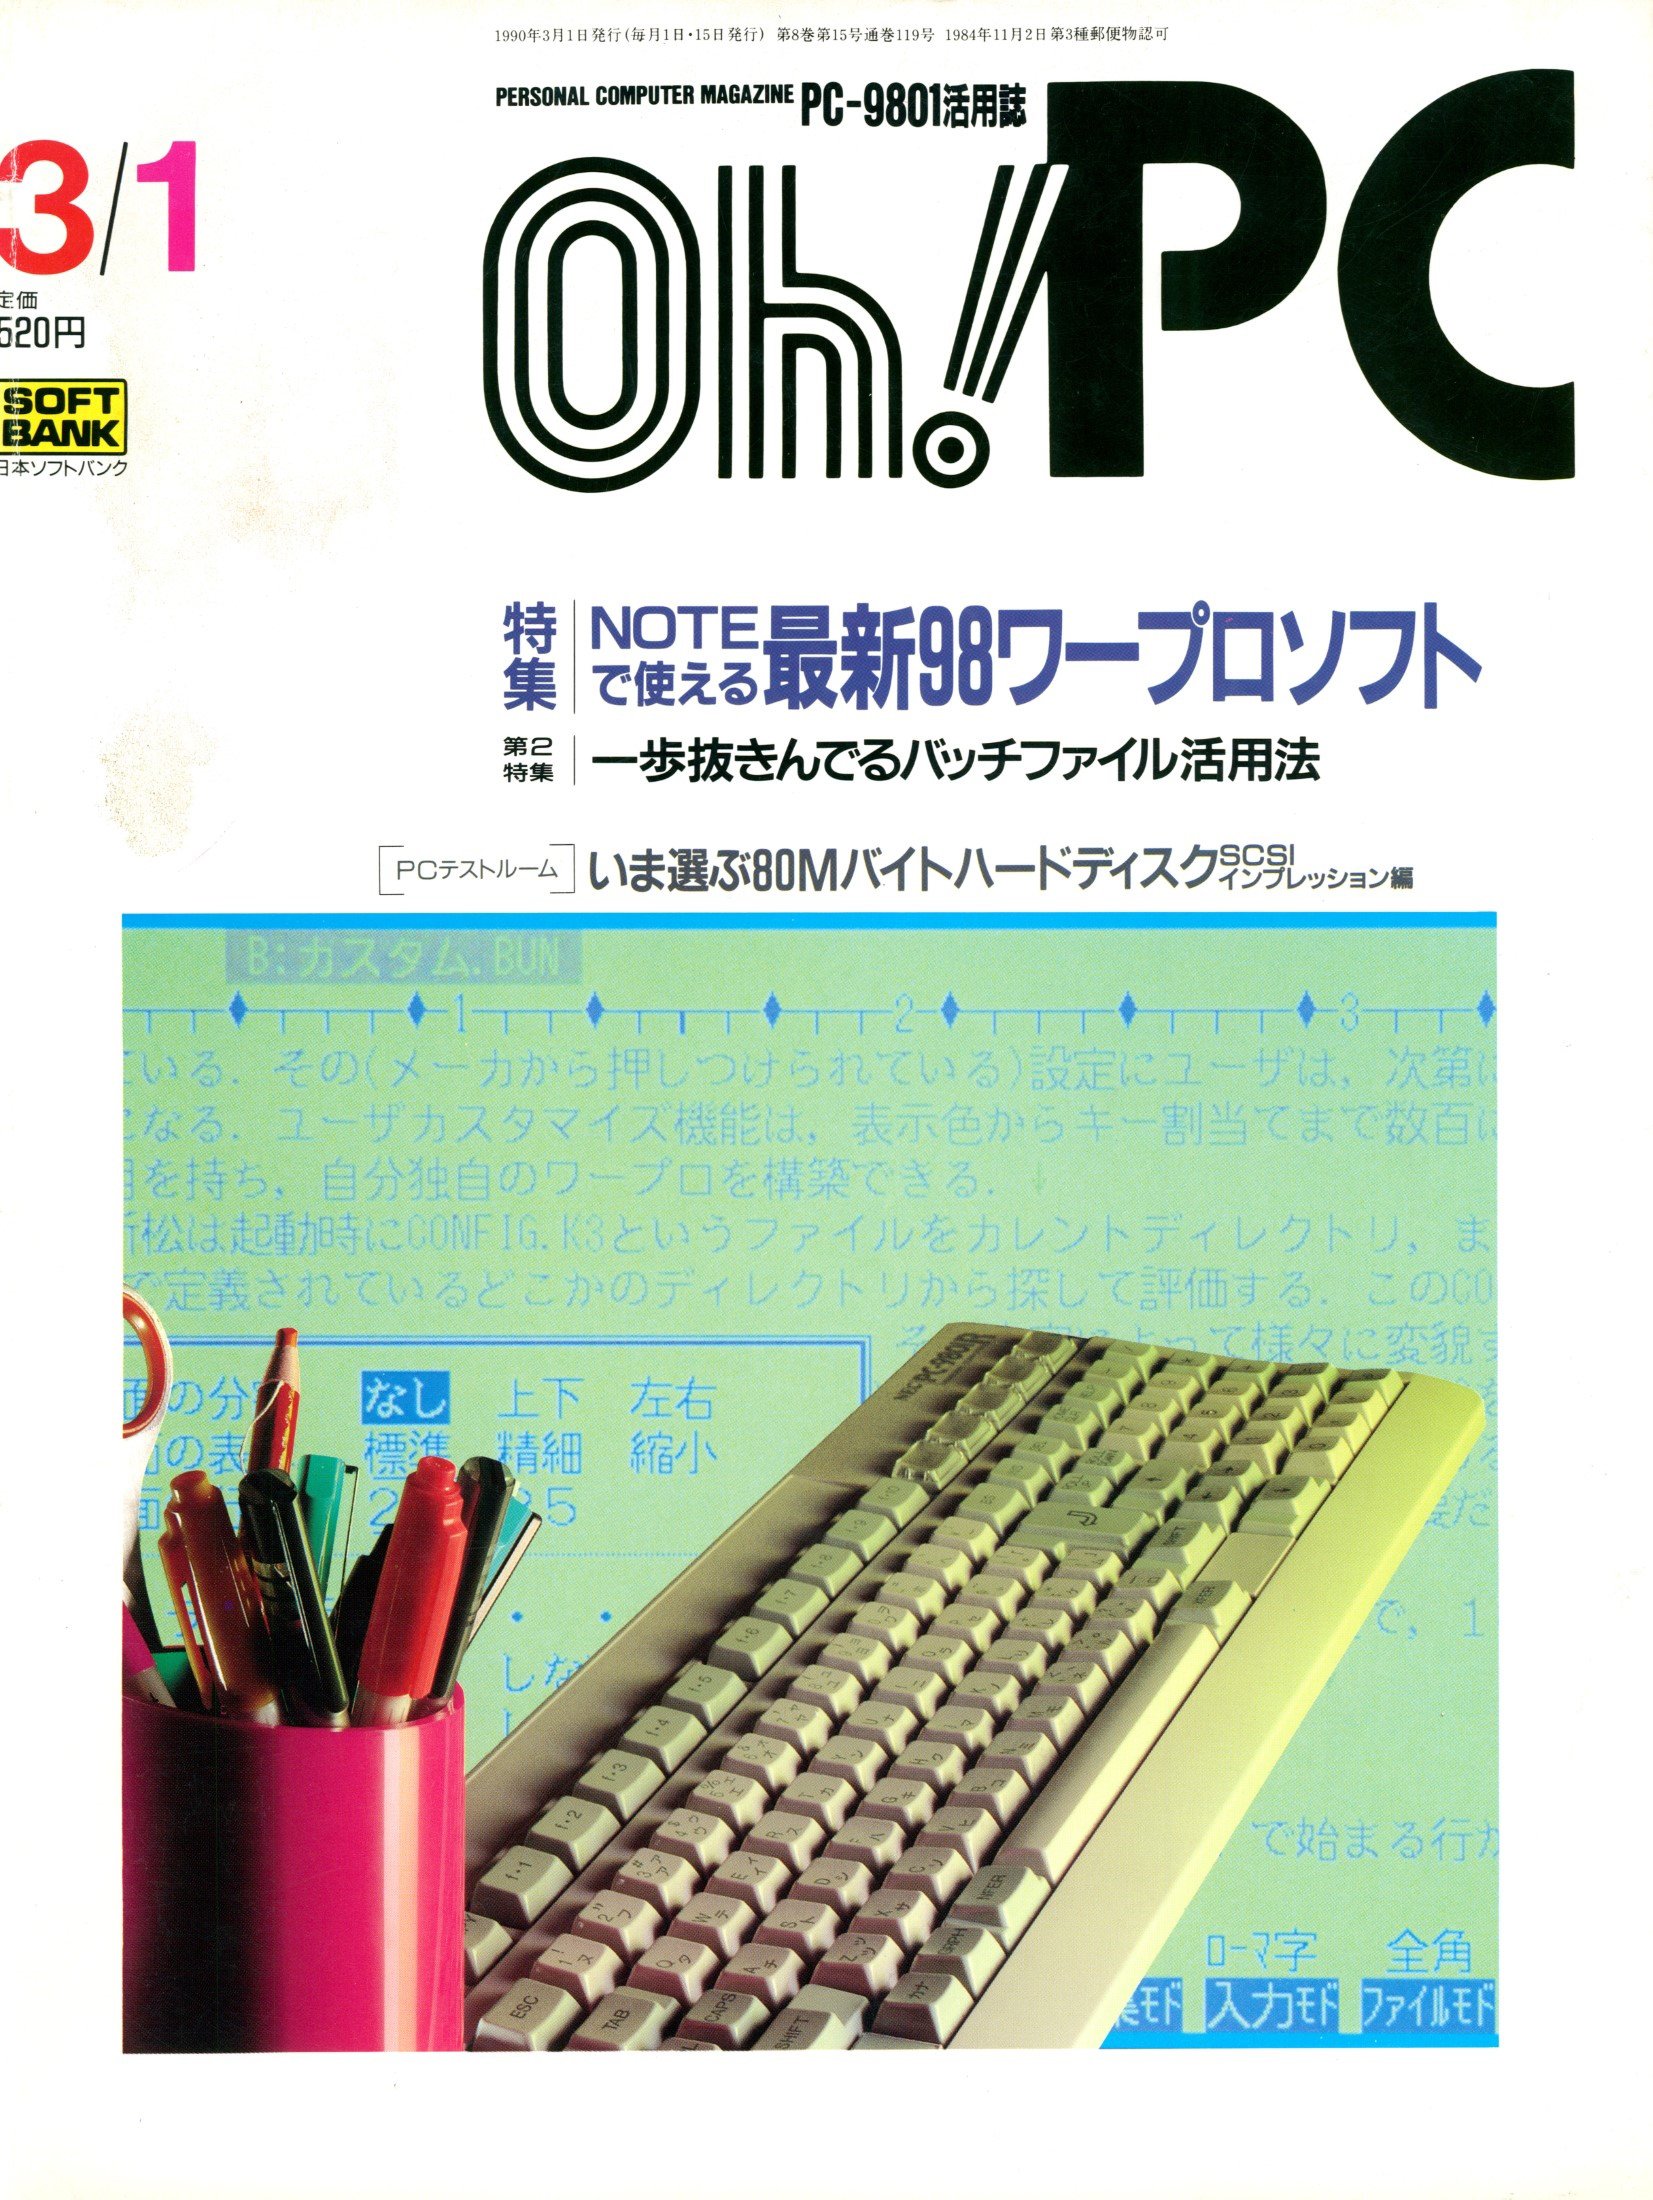 Oh! PC Issue 119 (Mar 01, 1990)